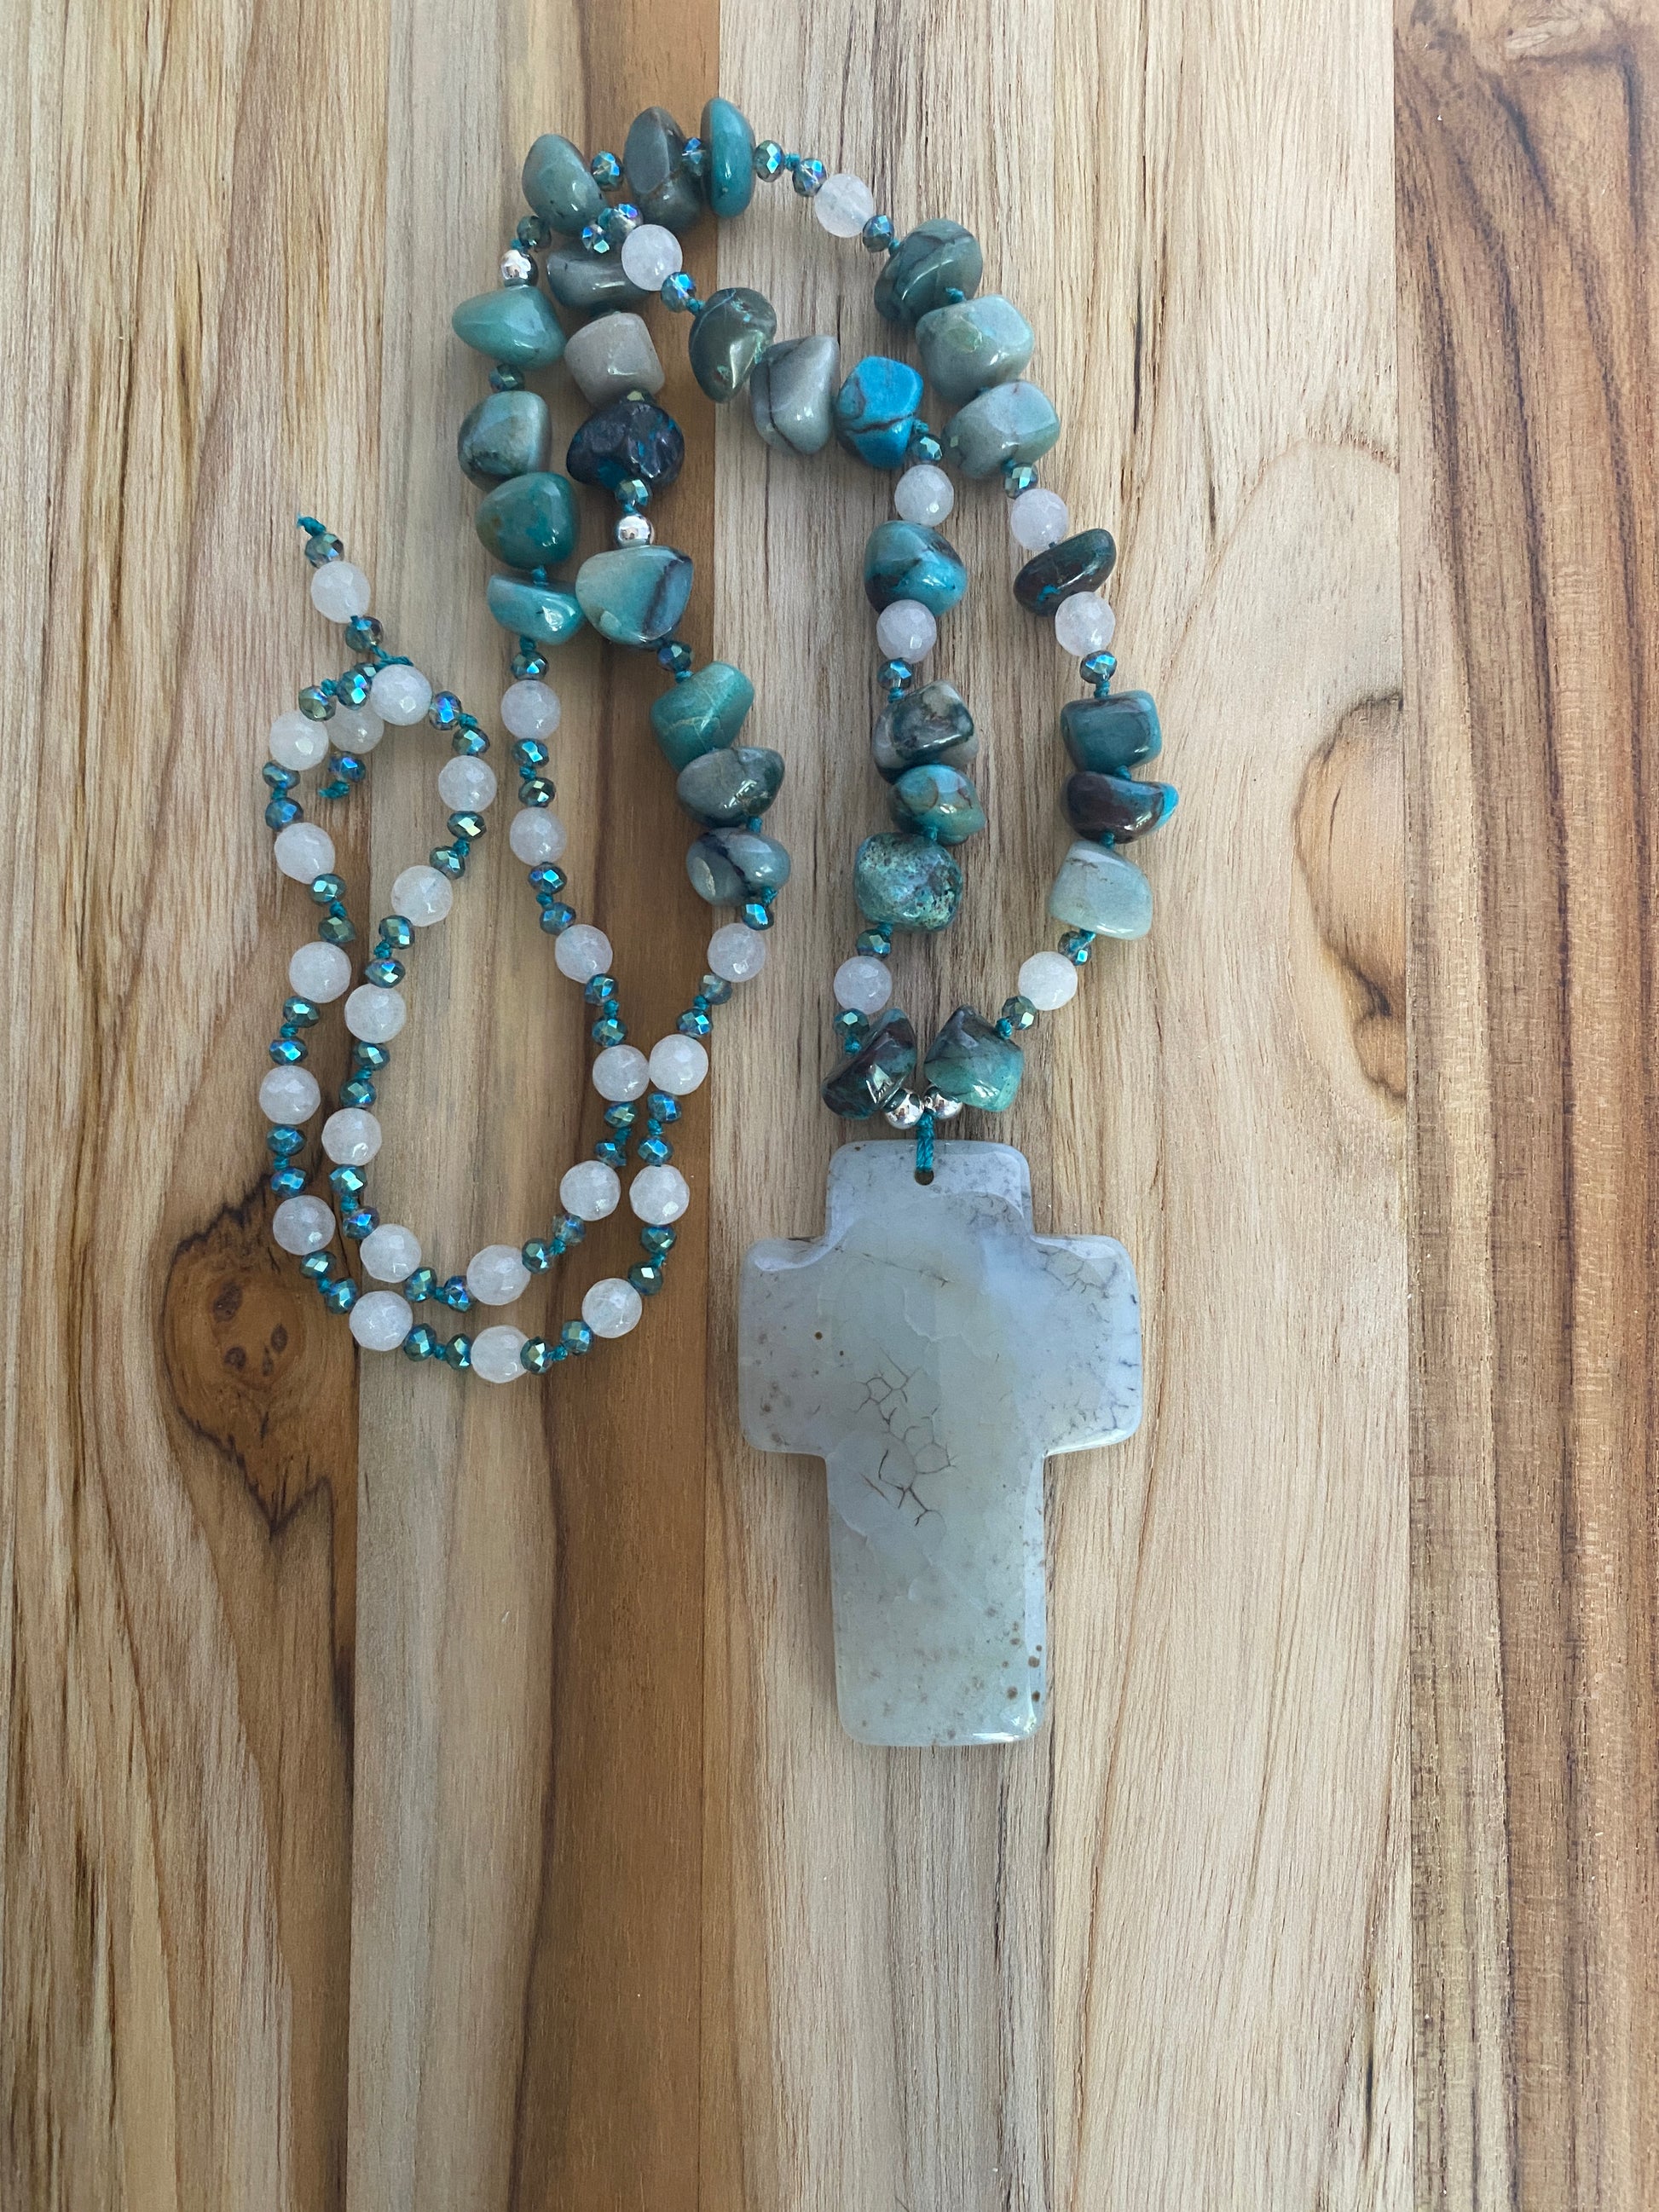 28" Long Light Grey Agate Cross Beaded Necklace with Tumbled Amazonite, Agate & Crystal Beads - My Urban Gems